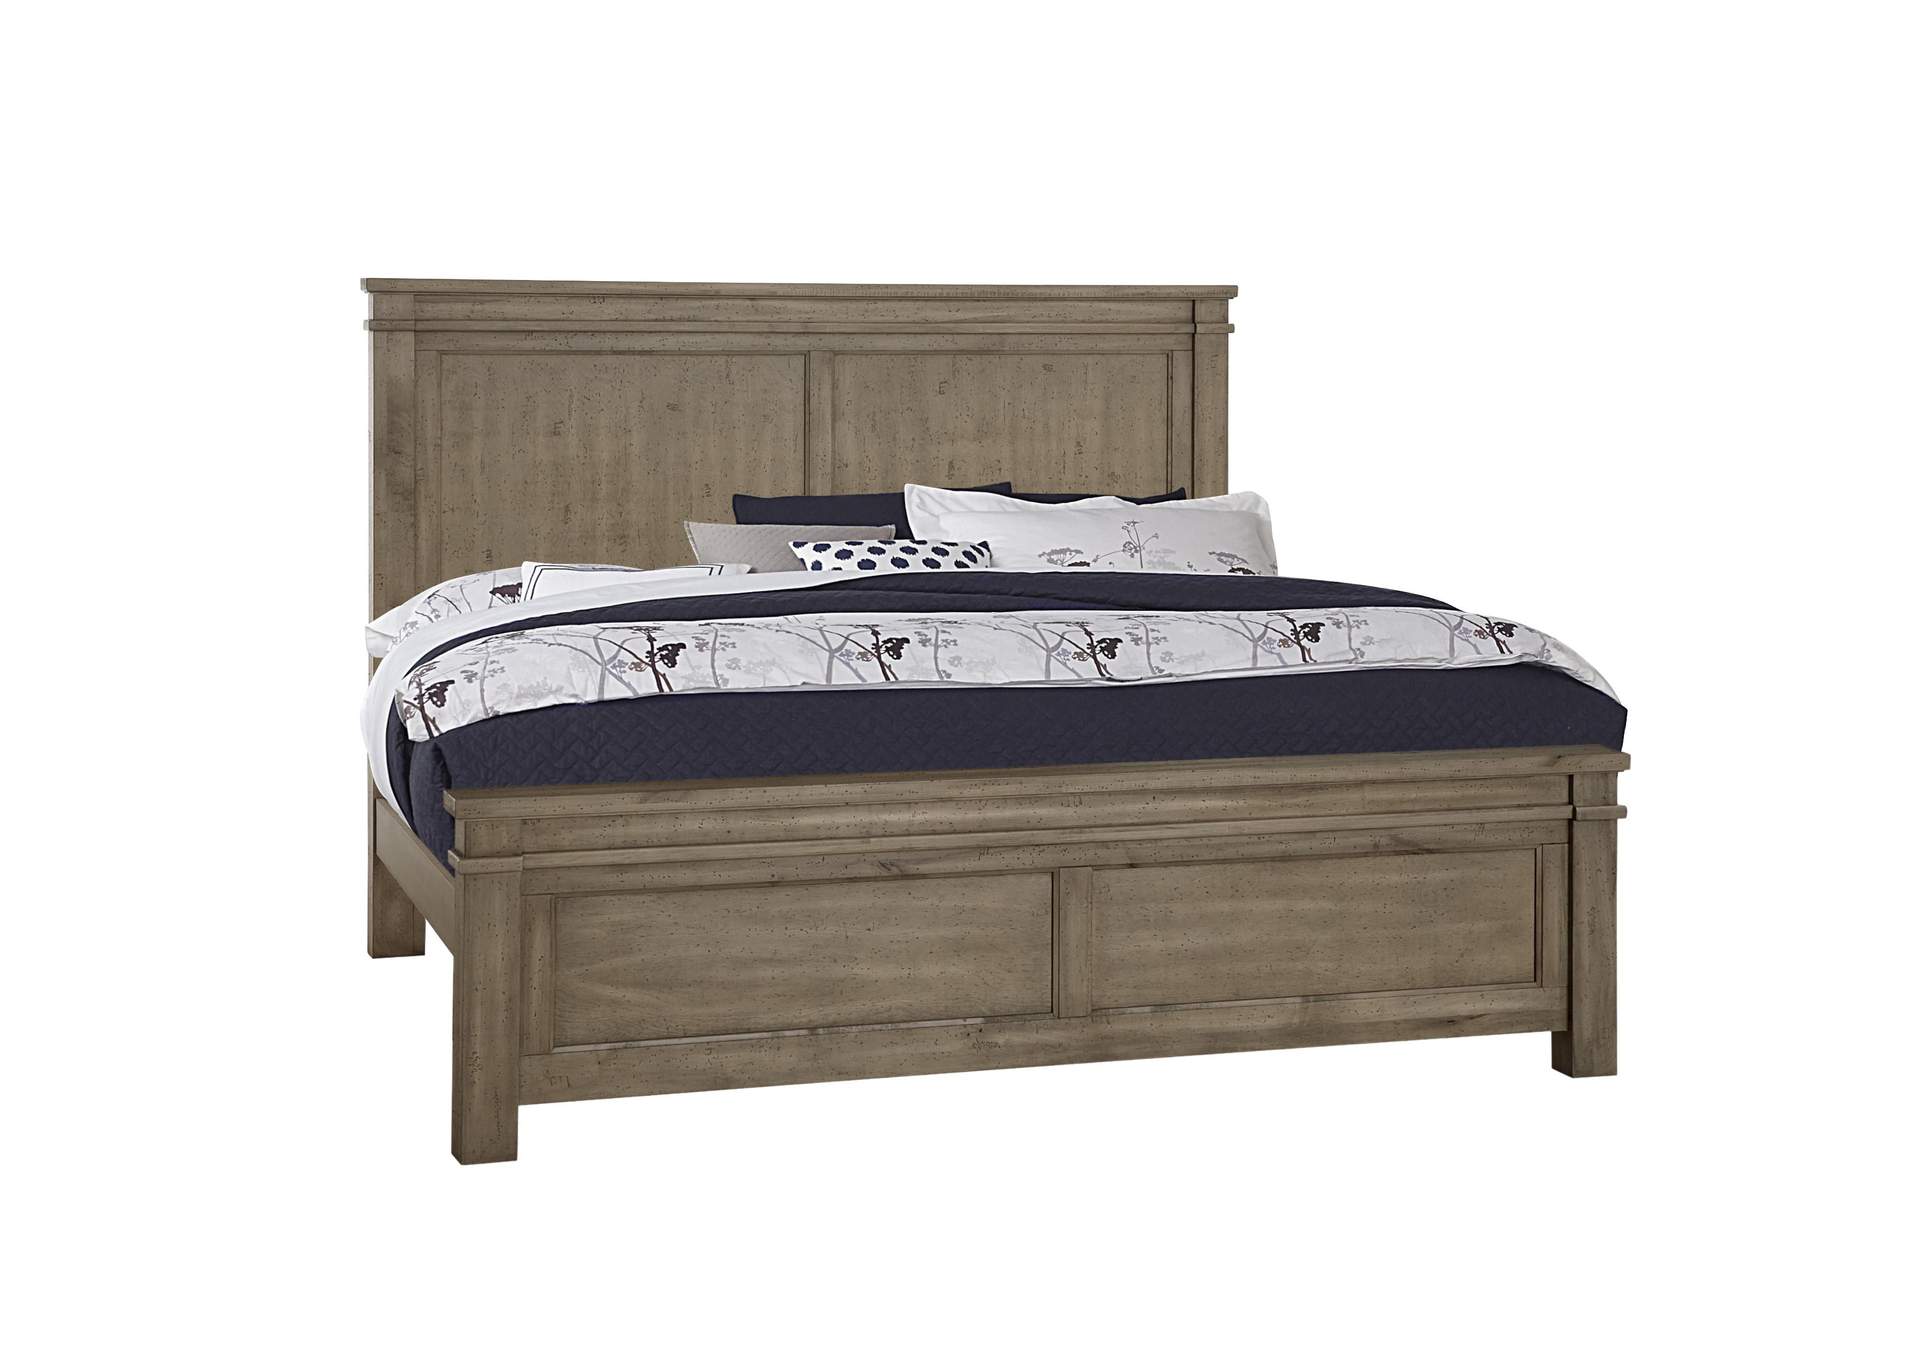 Cool Rustic Mansion King Bed Ivan Smith, Mansion King Bed